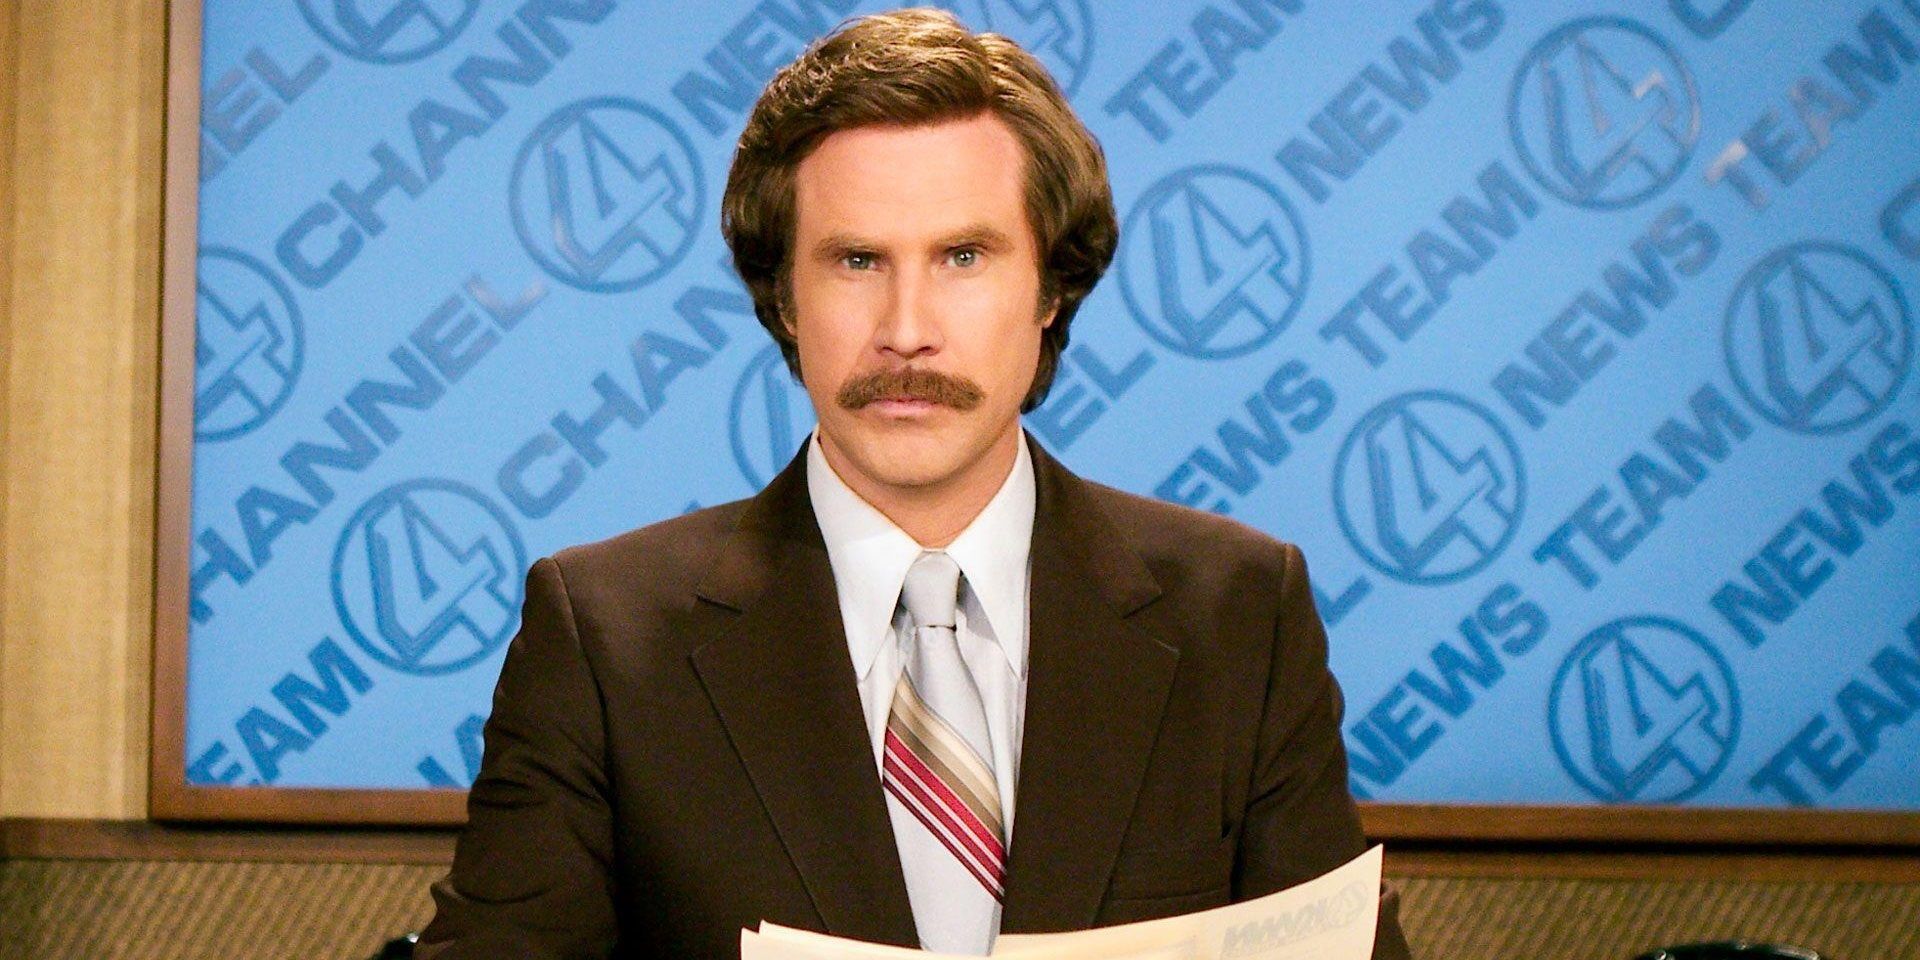 Ron Burgundy reads from a teleprompter in Anchorman